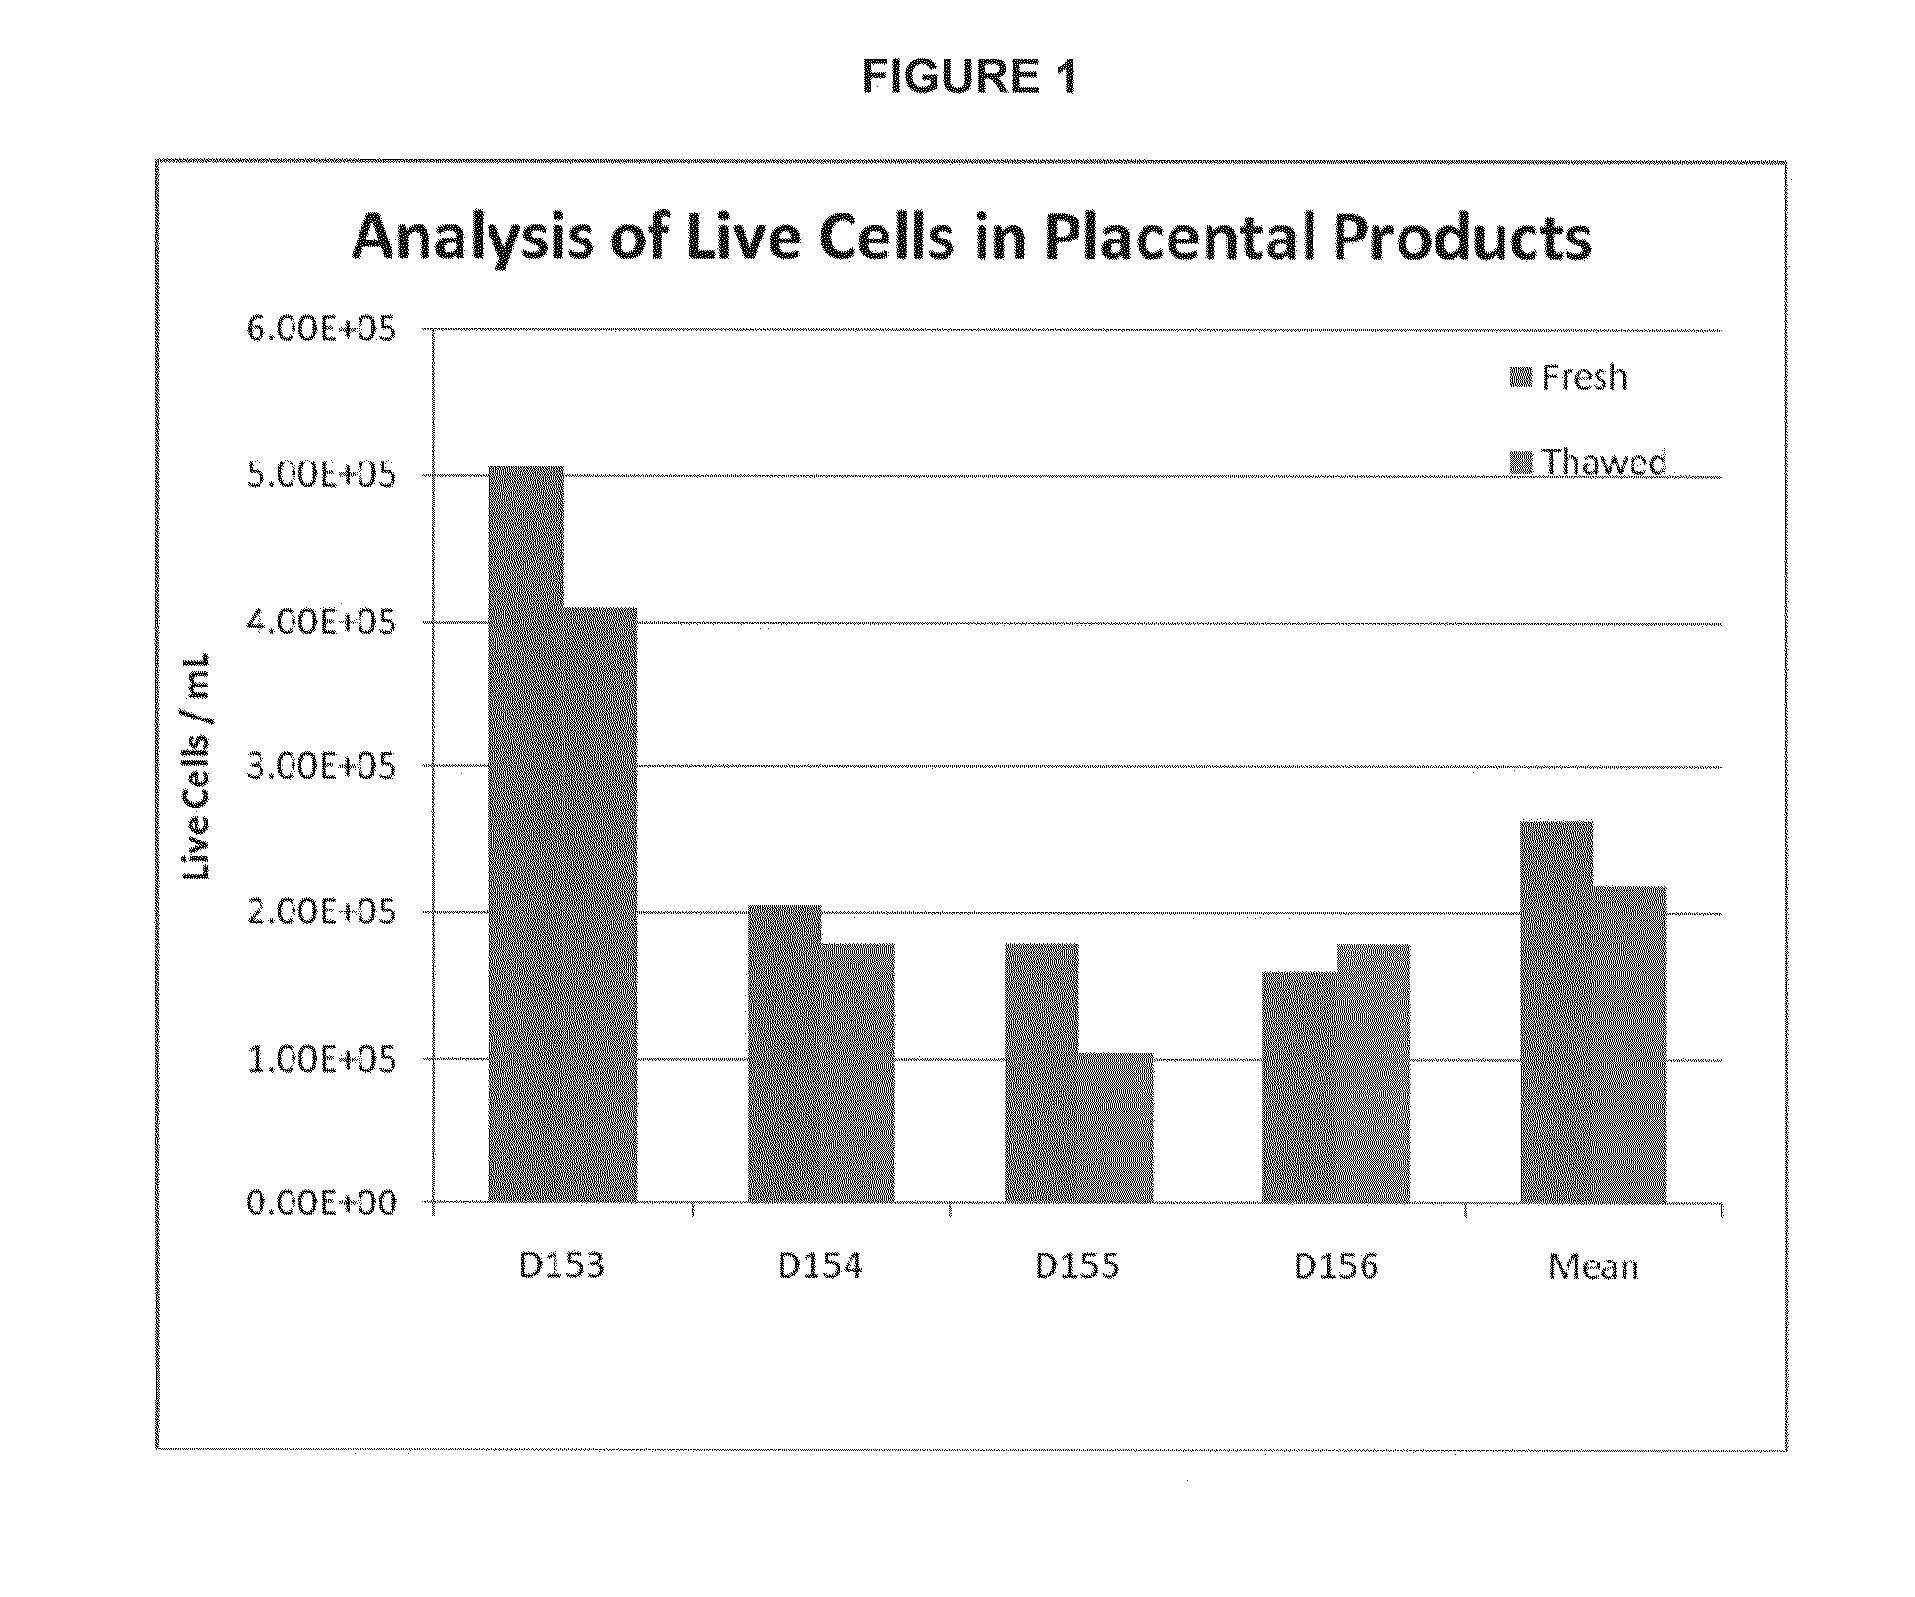 Therapeutic products comprising vitalized placental dispersions